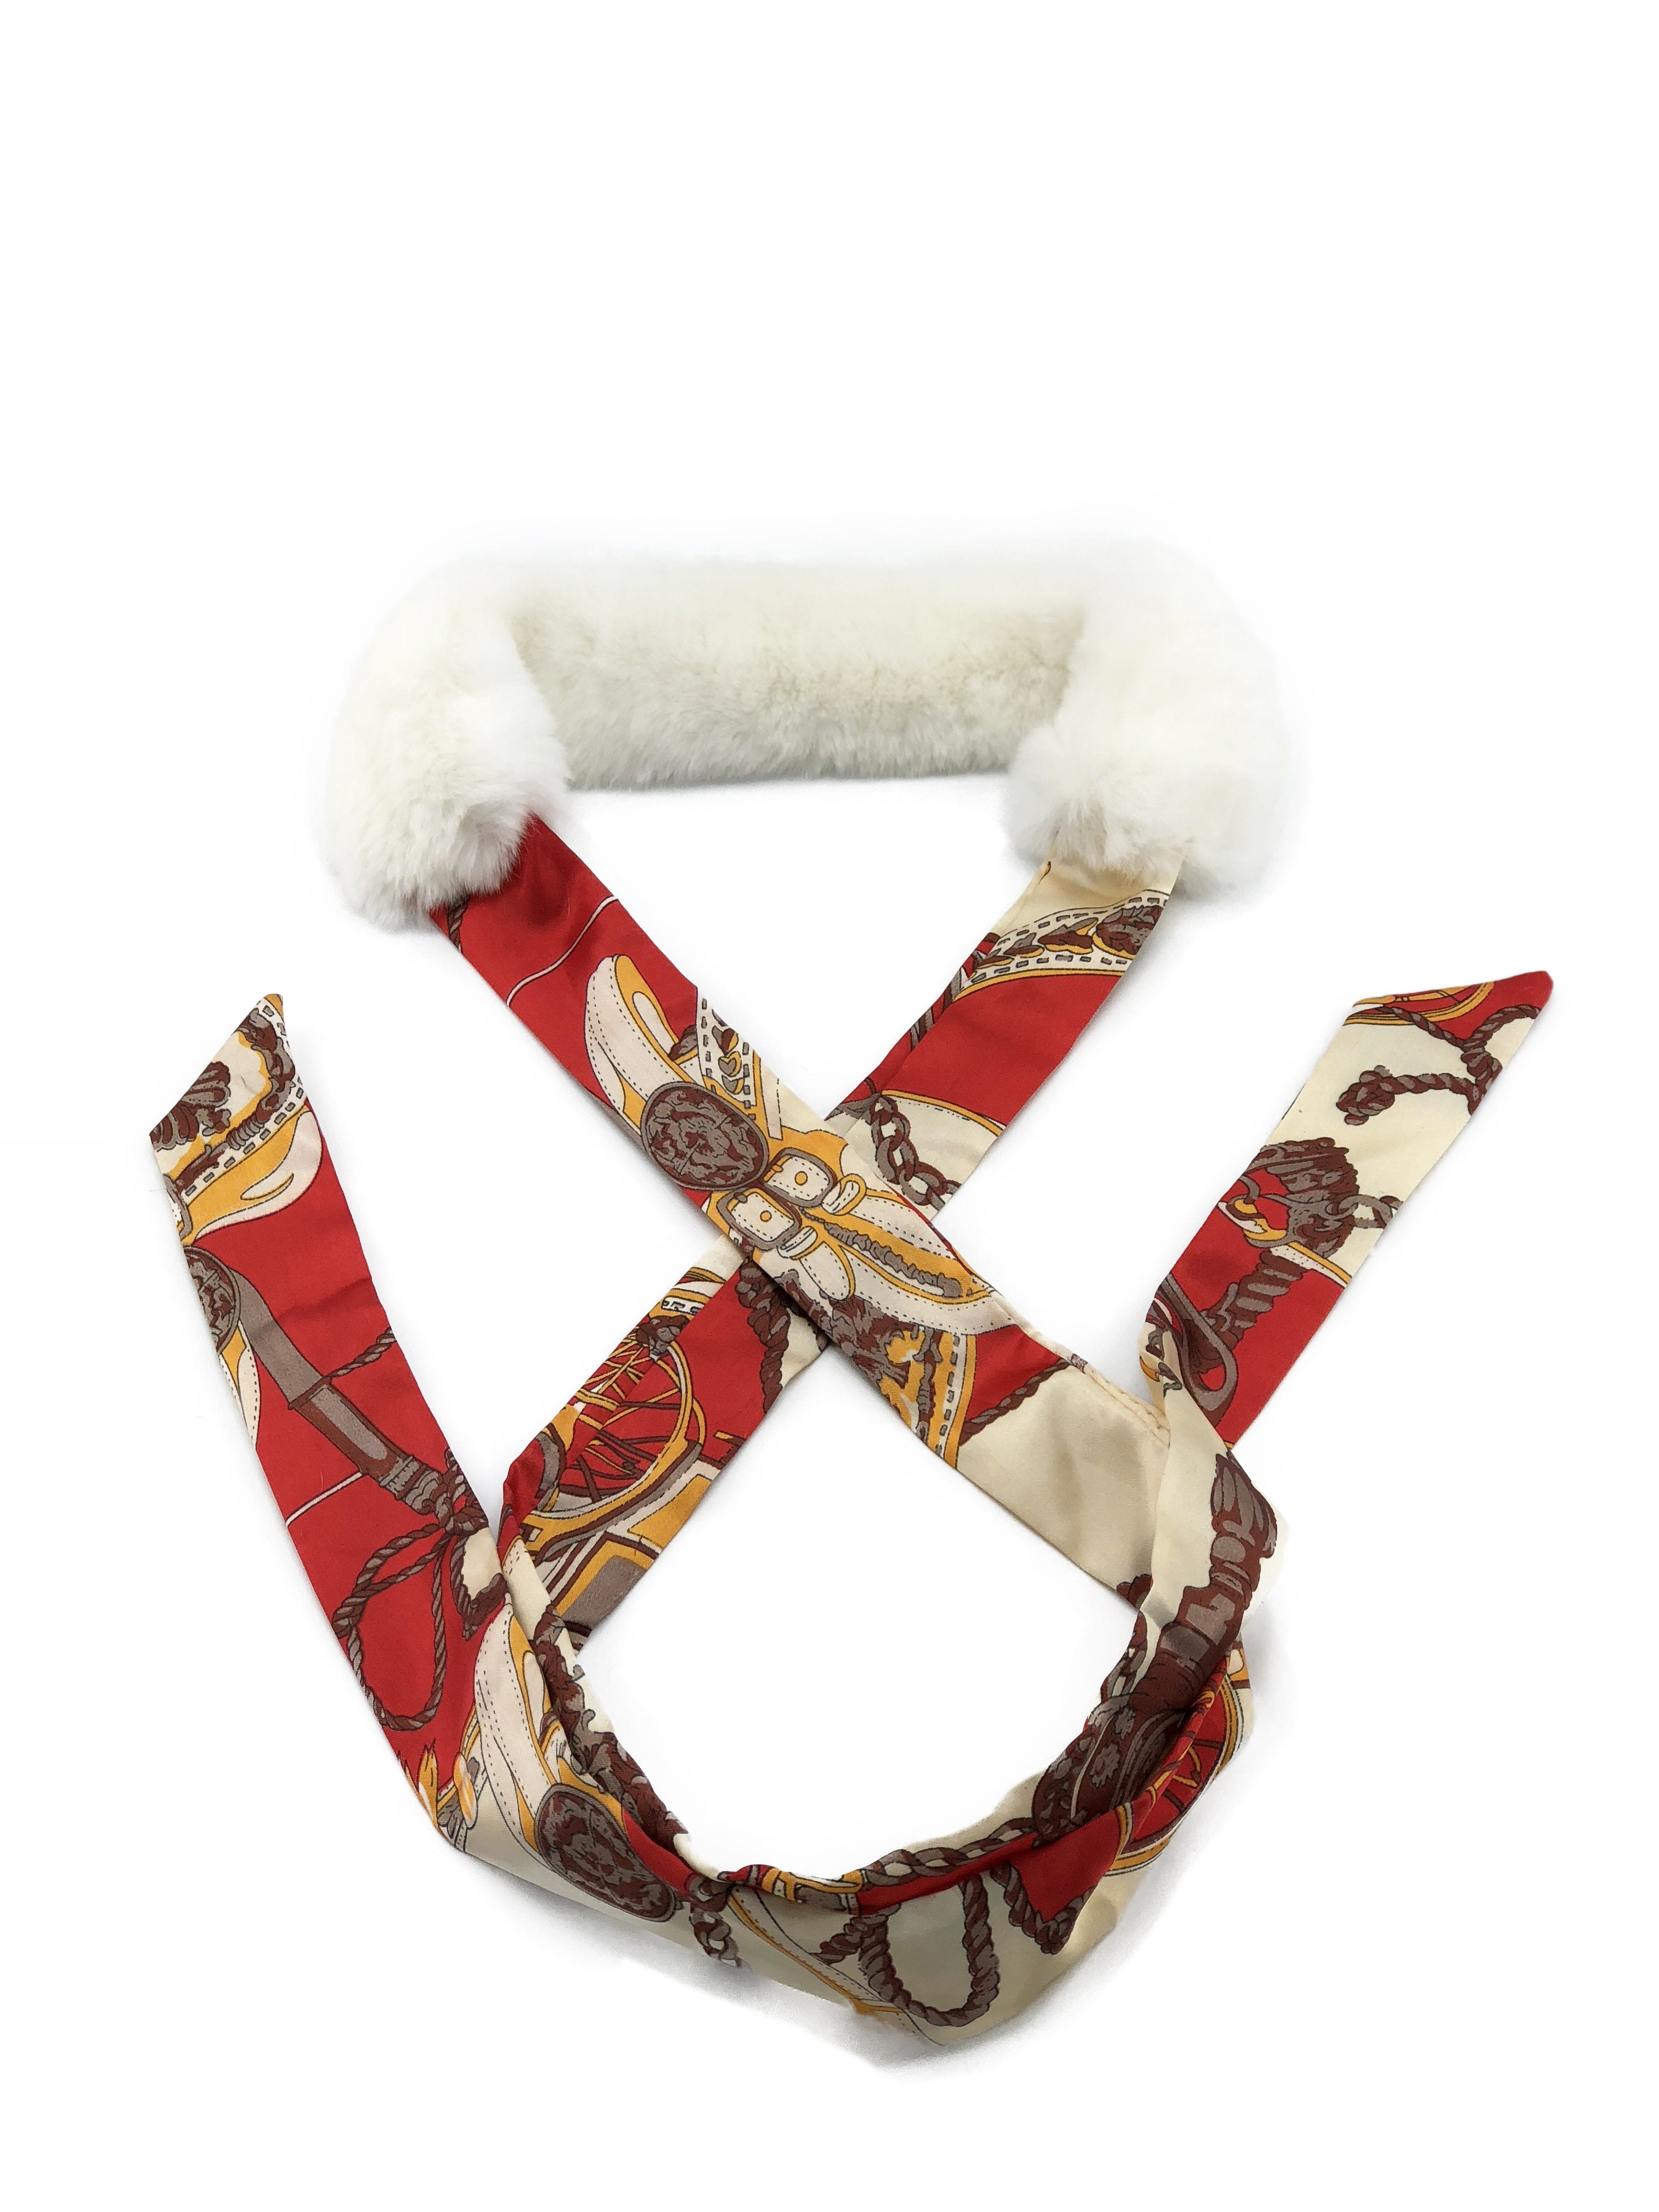 White Rex Rabbit Scarf with Red/Gold Silk Ribbon - paulamariecollection